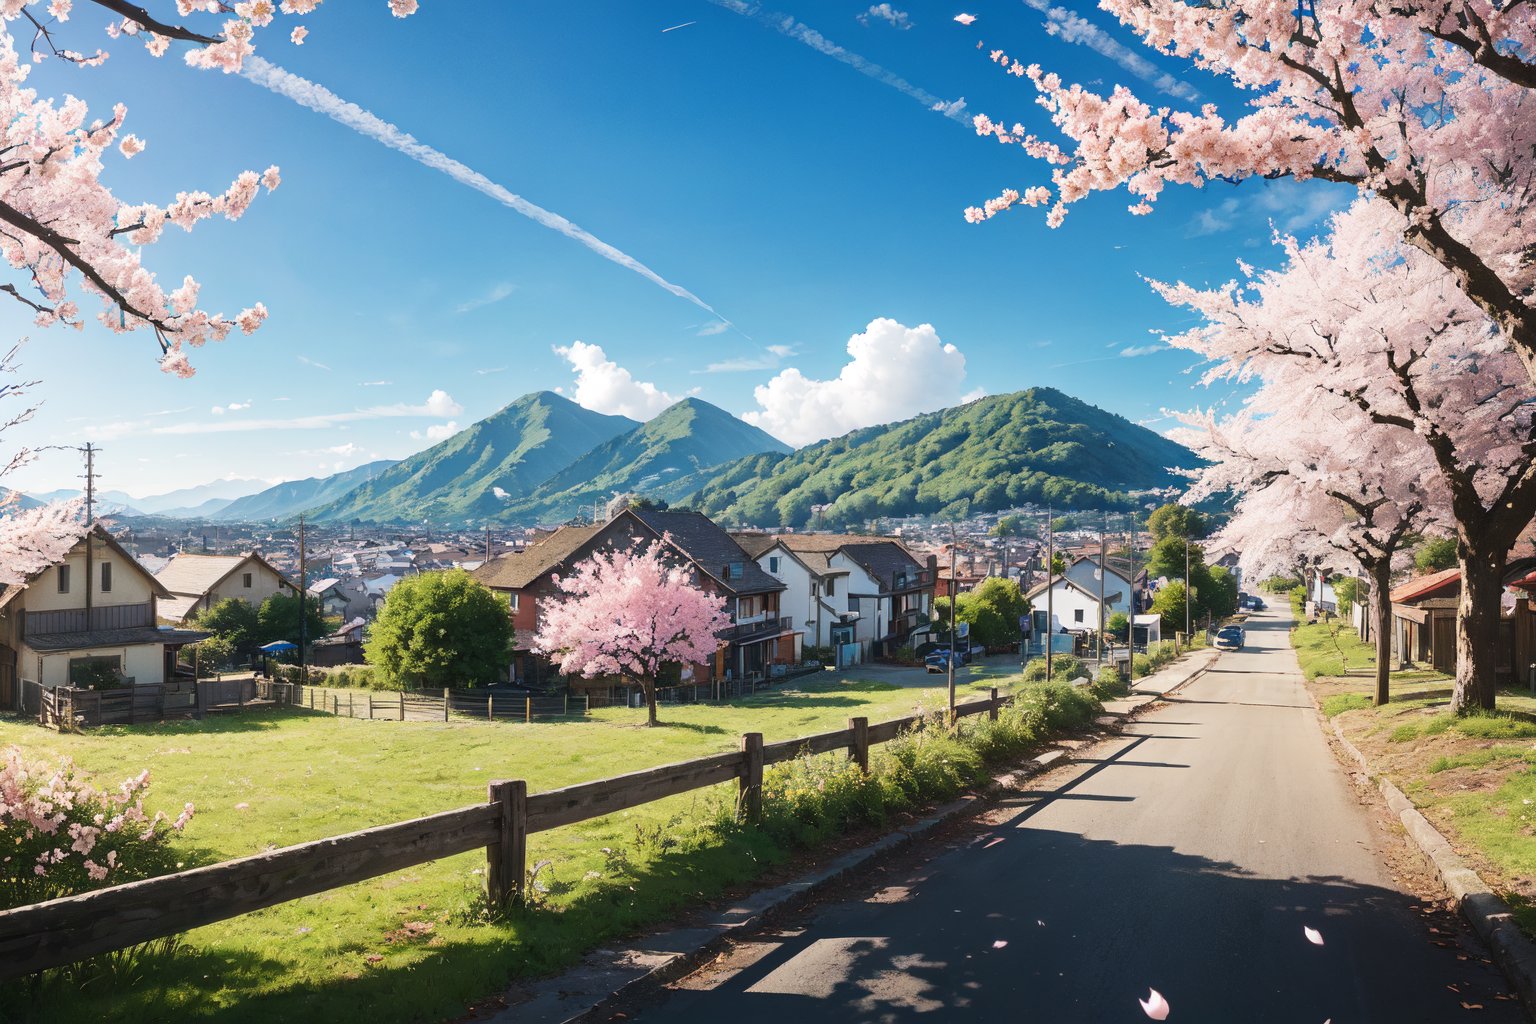 outdoors, sky, day, tree, blue sky, no humans, plant, building, scenery, mountain, city, road, cityscape, house, power lines, town, balcony, real world location, cherry blossom, flower, nature, tree, spring.